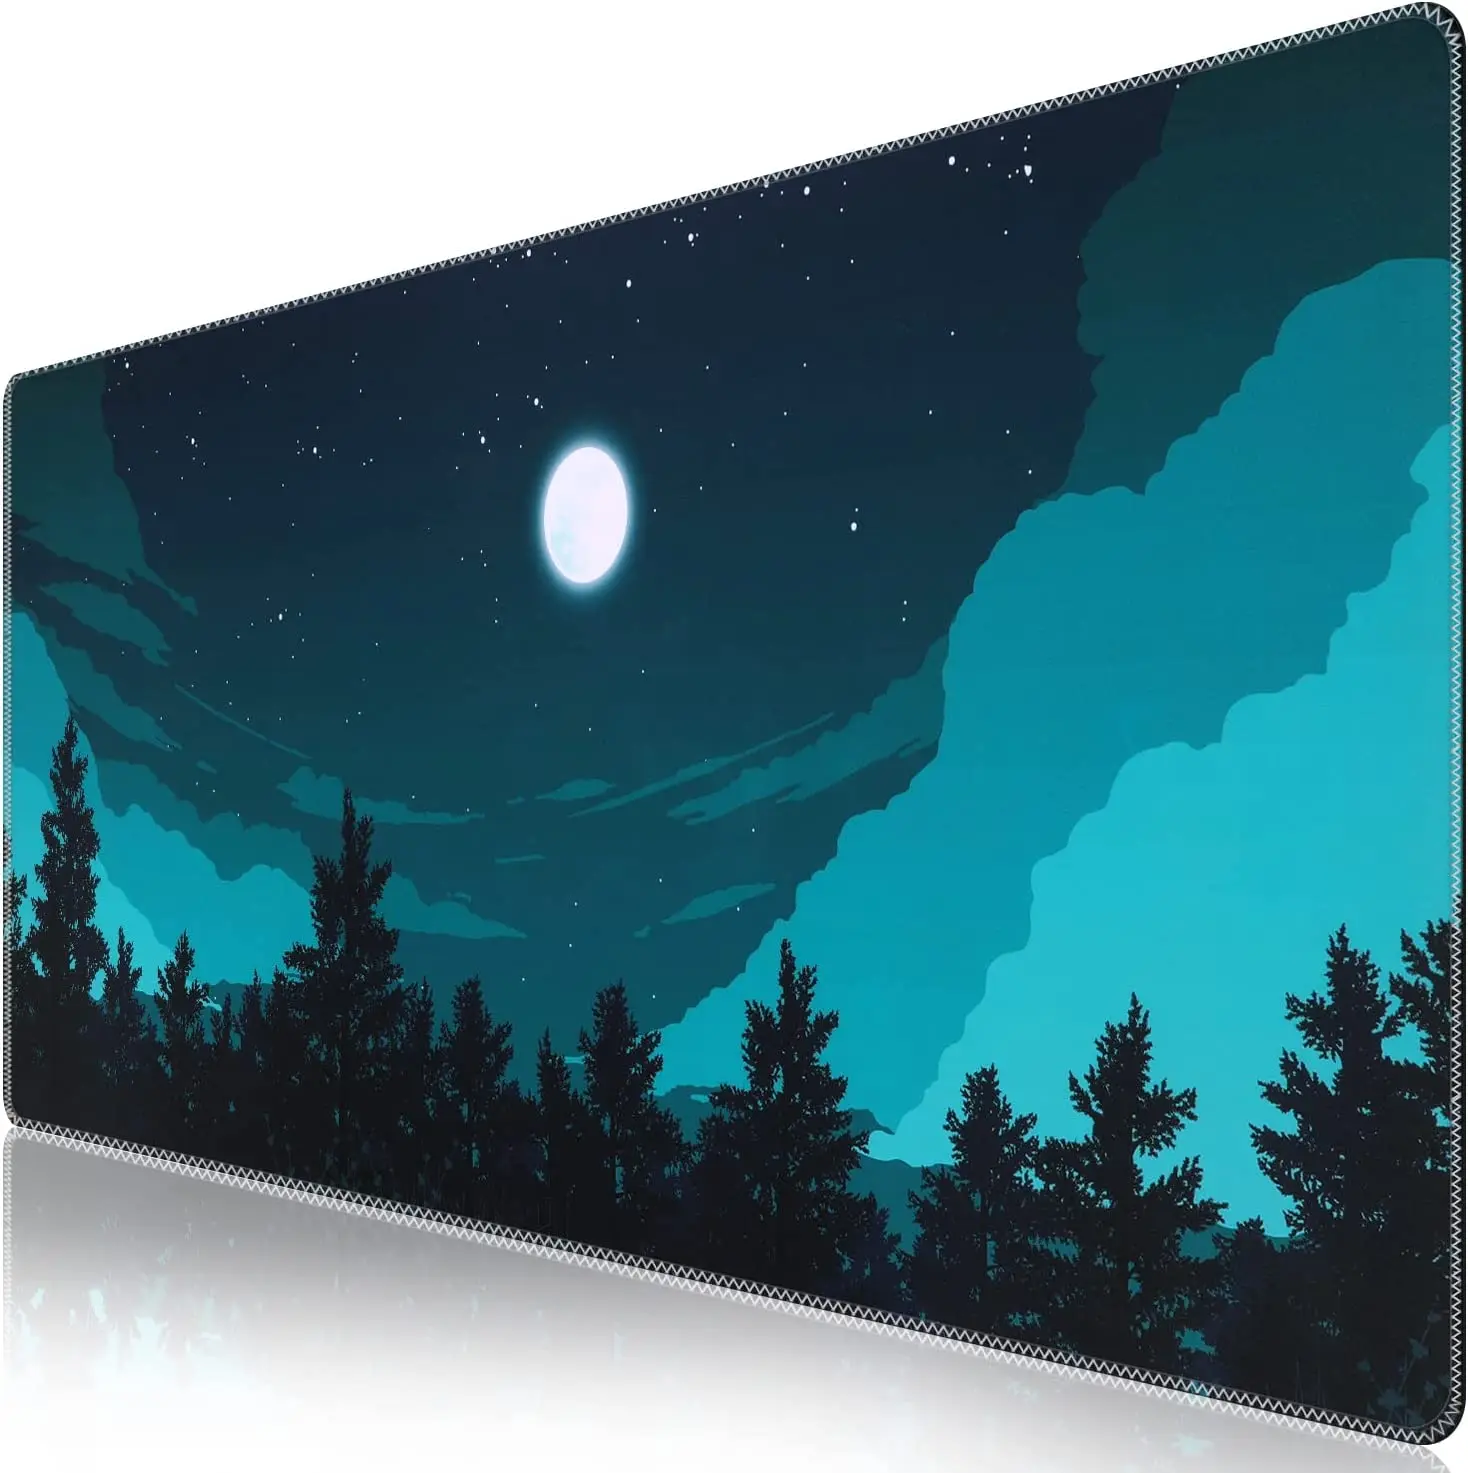 

Extended Mouse Pad 35.4x15.7 in Large 3mm Non-Slip Rubber Base Mousepad with Stitched Edges Waterproof Desk Pad- Silent Night